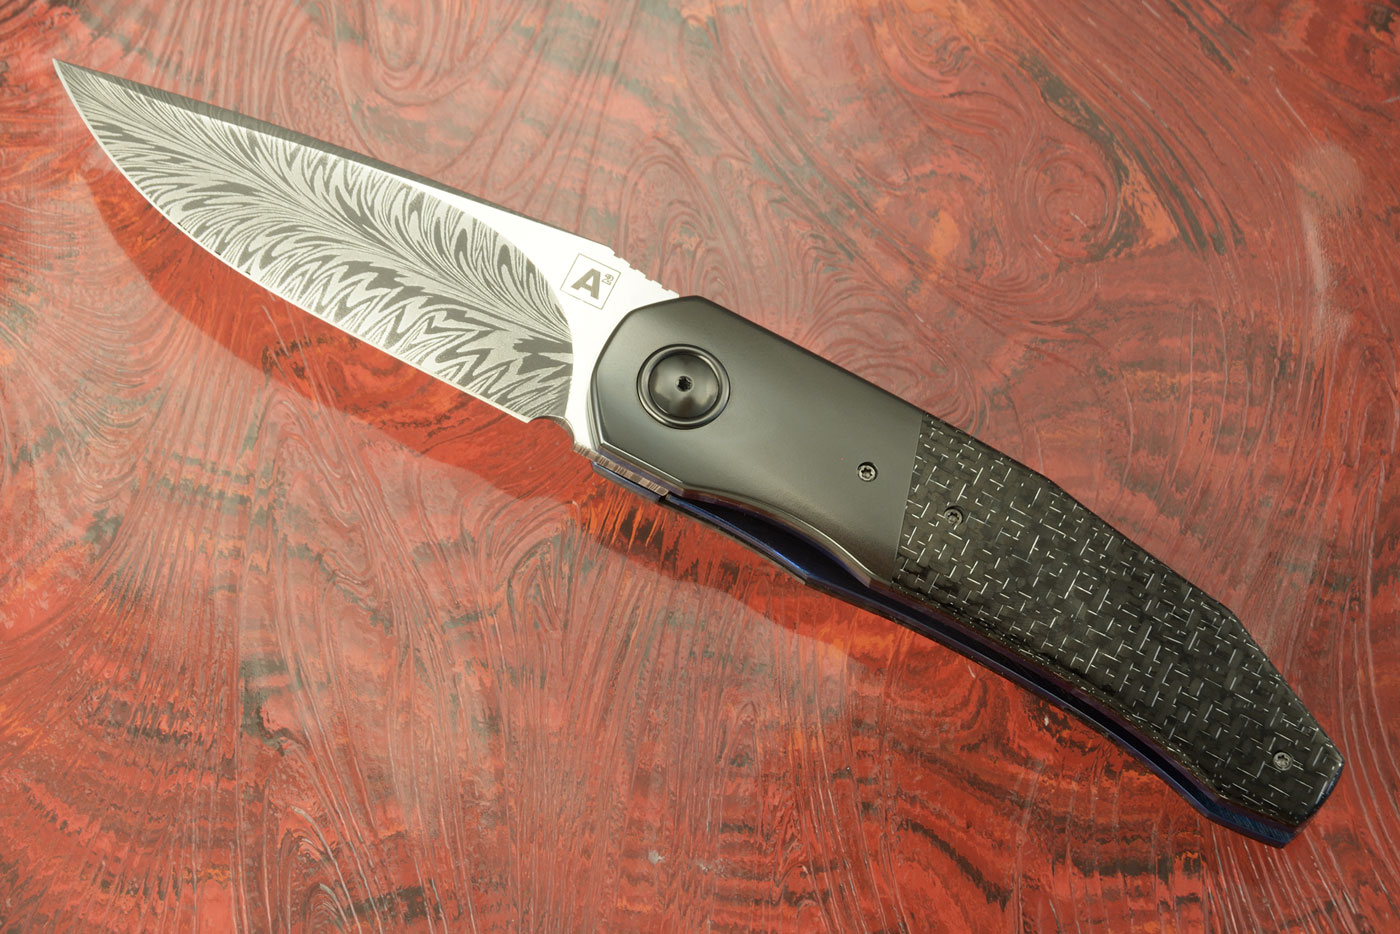 A9 Front Flipper Premium with Feather Damascus, Silver Strike Carbon Fiber, and Zirconium (Ceramic IKBS)